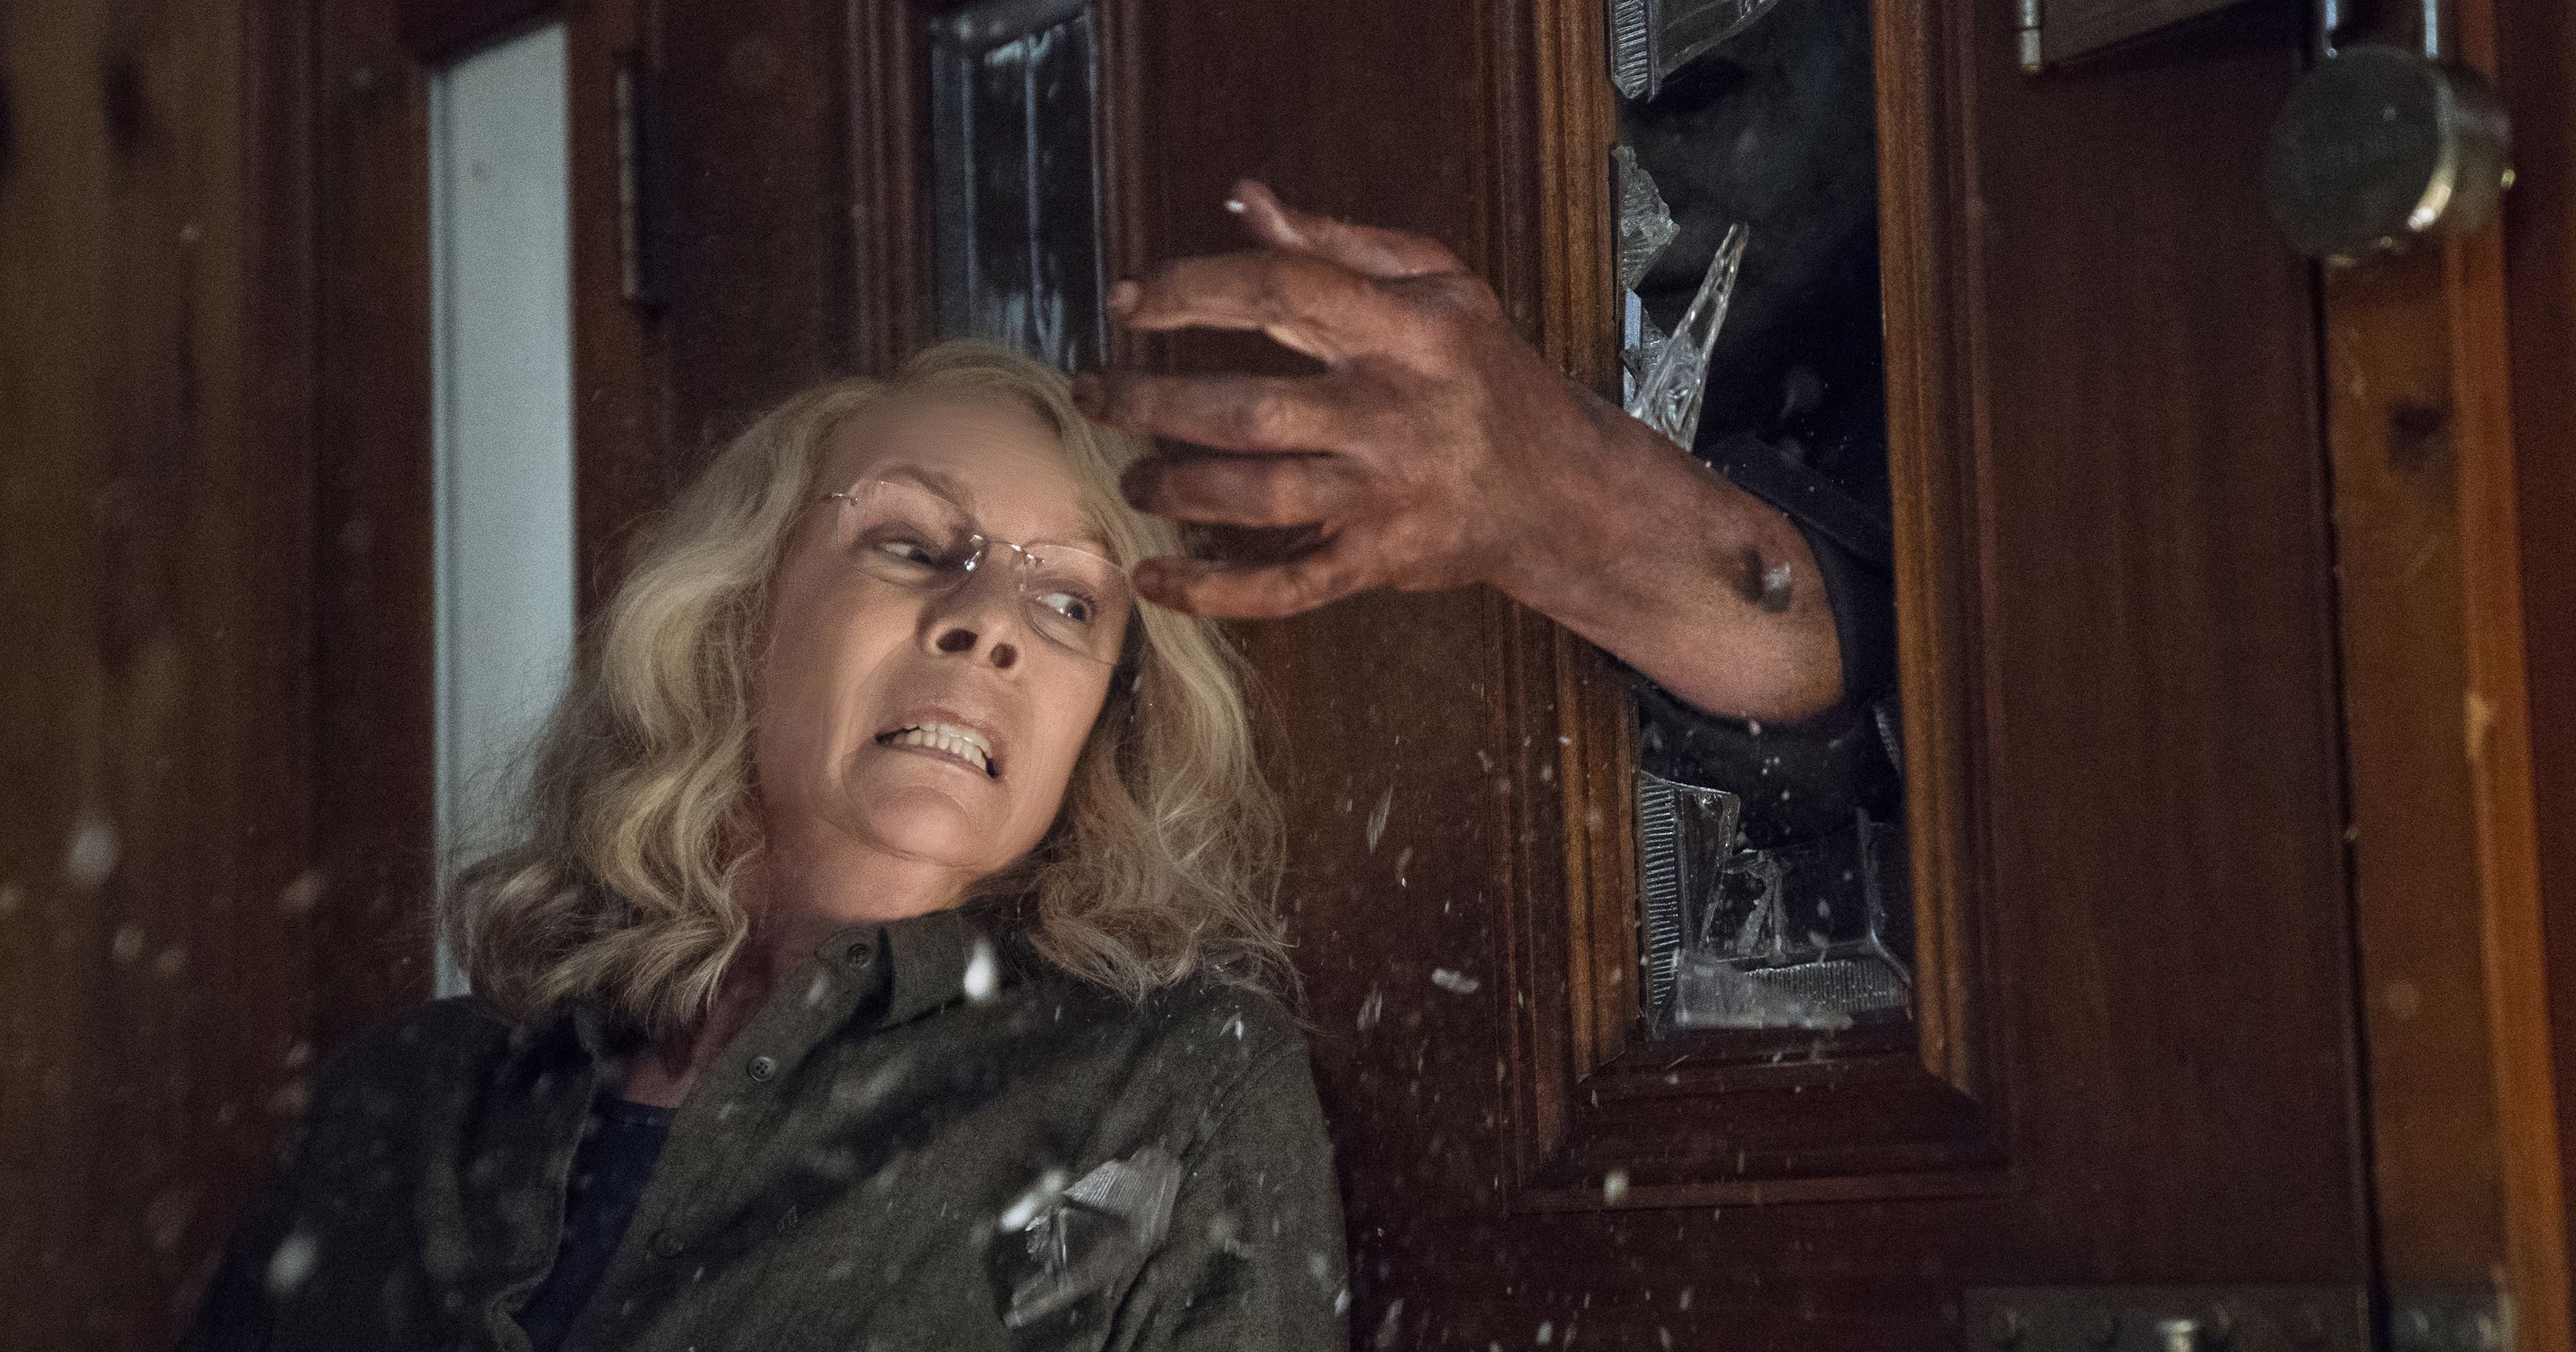 The Trailer For The Newest 'Halloween' Reboot Is Here To Give You Nightmares